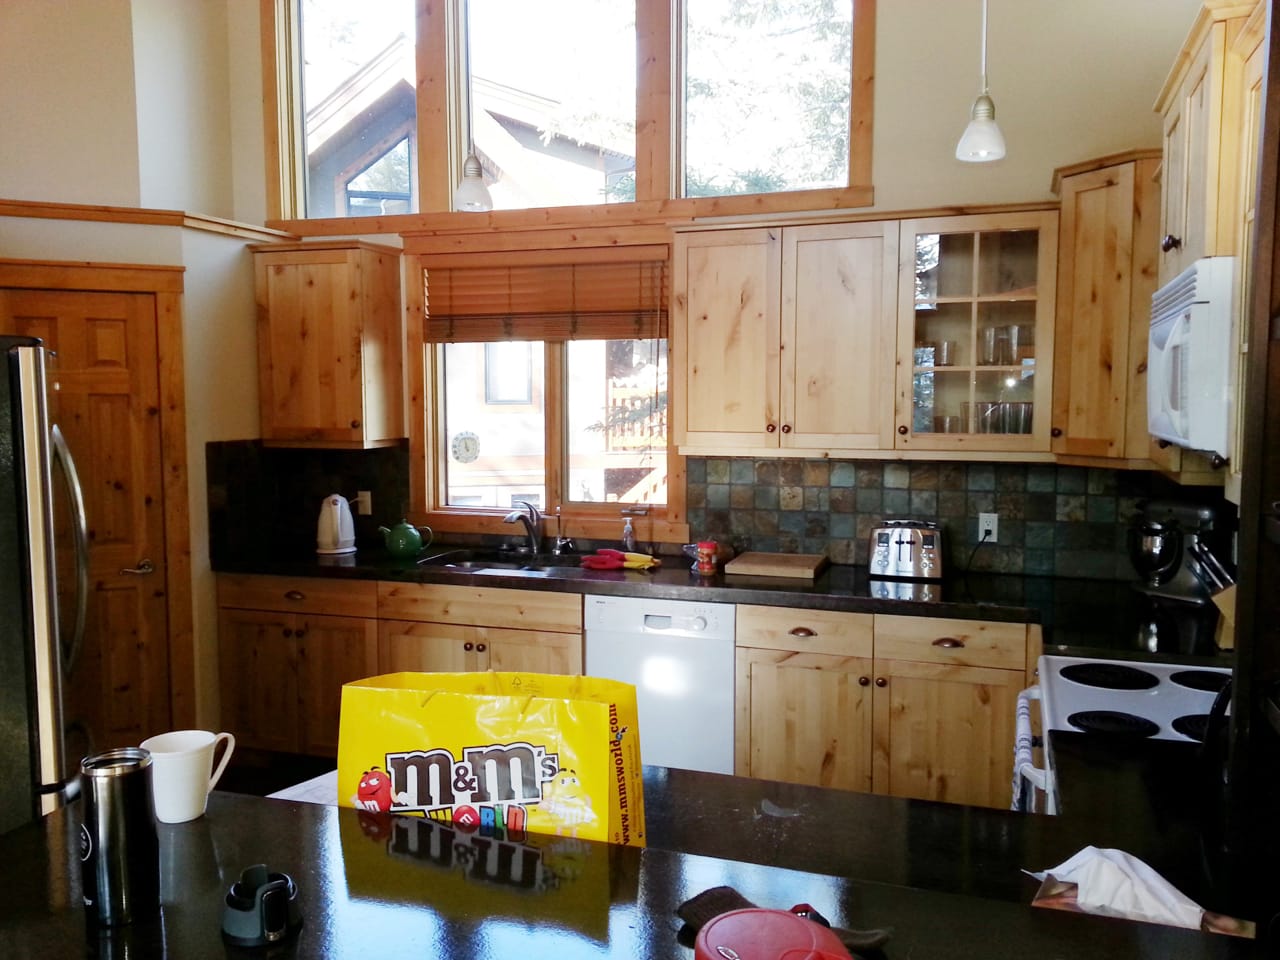 Lacking countertop space and storage, this home in Canmore required updating.